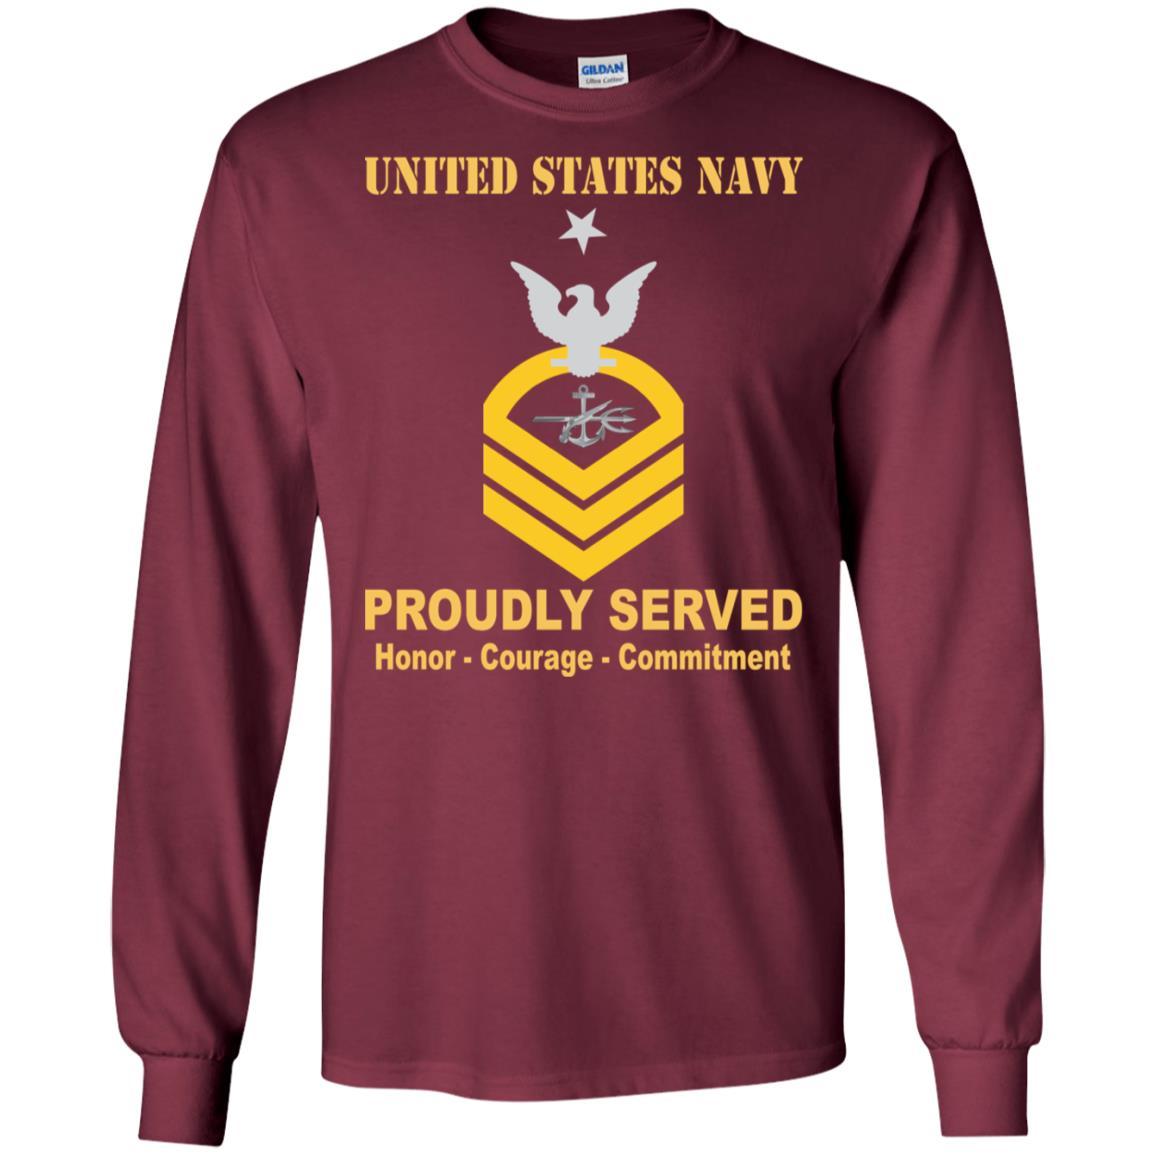 Navy Special Warfare Operator Navy SO E-8 Rating Badges Proudly Served T-Shirt For Men On Front-TShirt-Navy-Veterans Nation